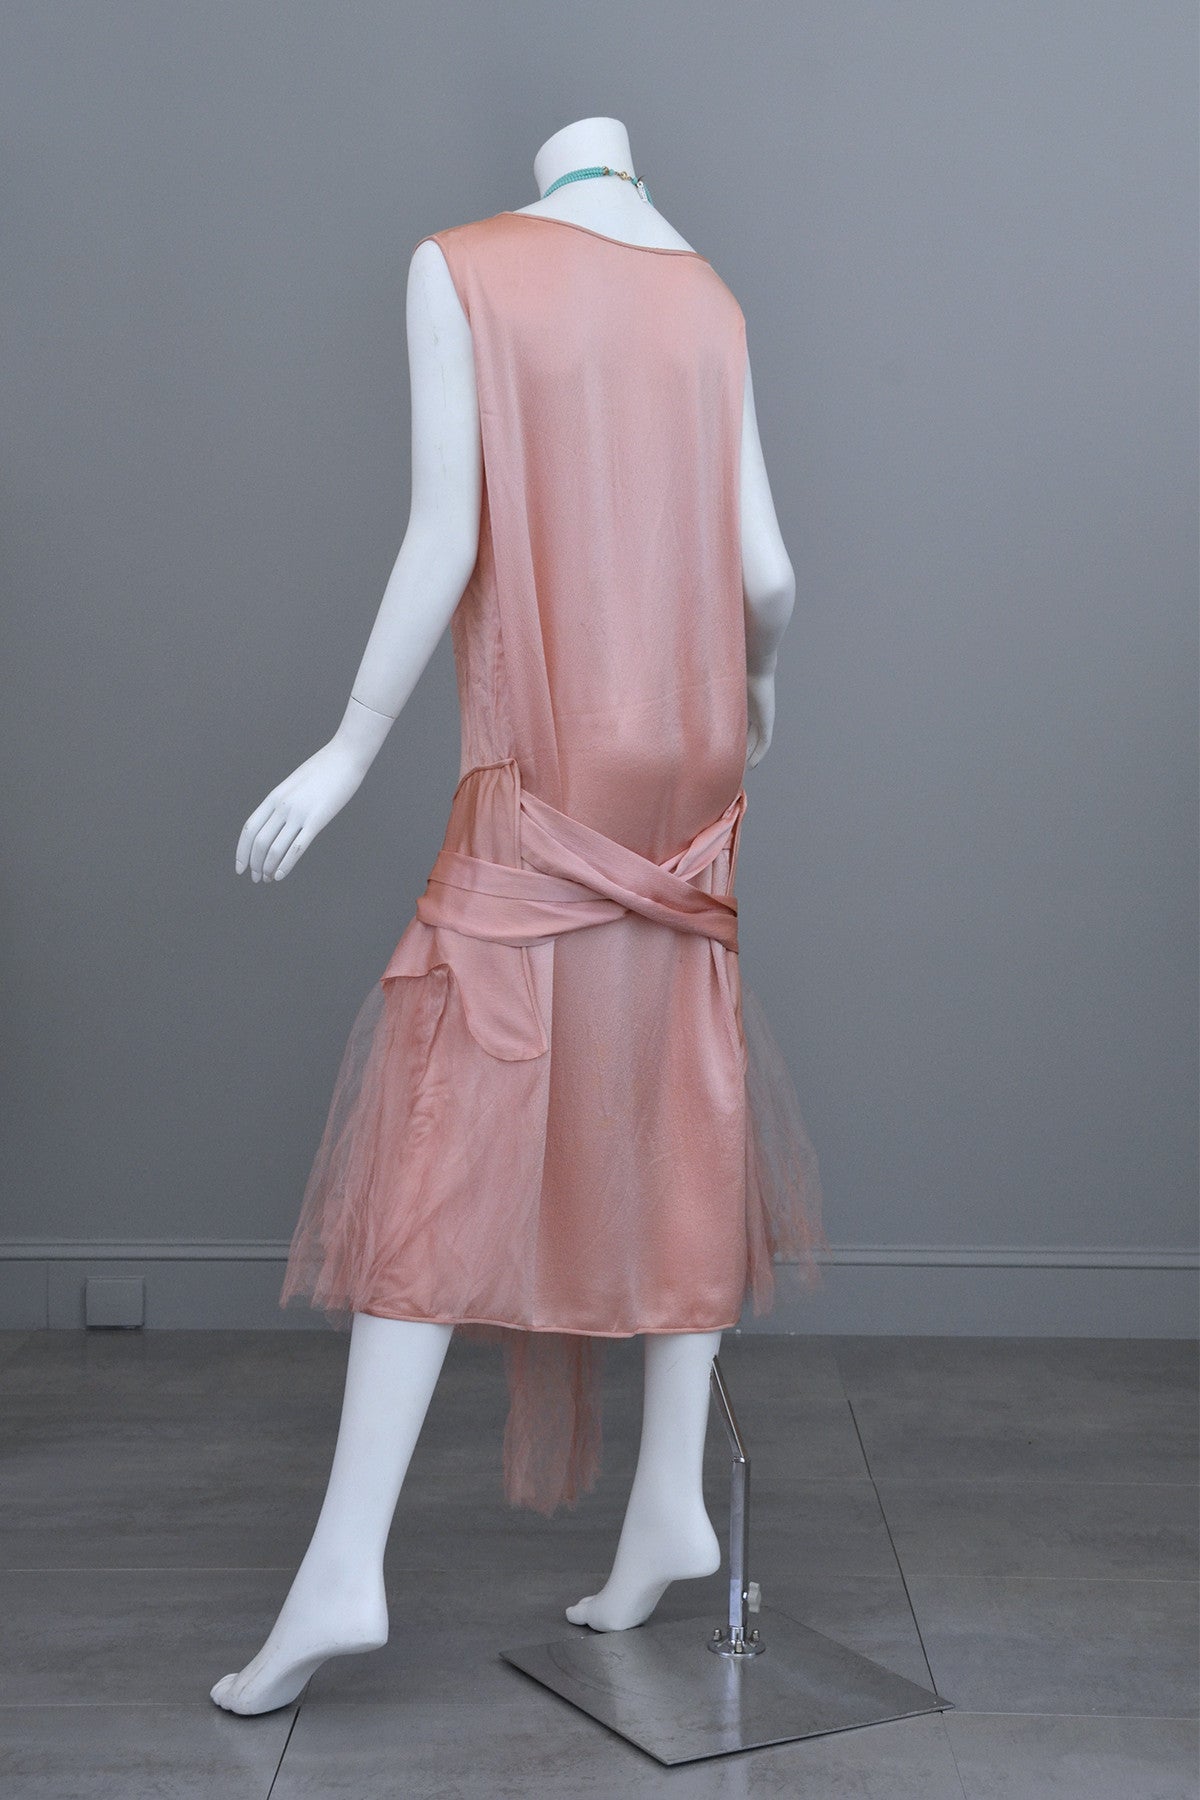 1920s Deco Pink Satin and Tulle Ballerina Flapper Dress